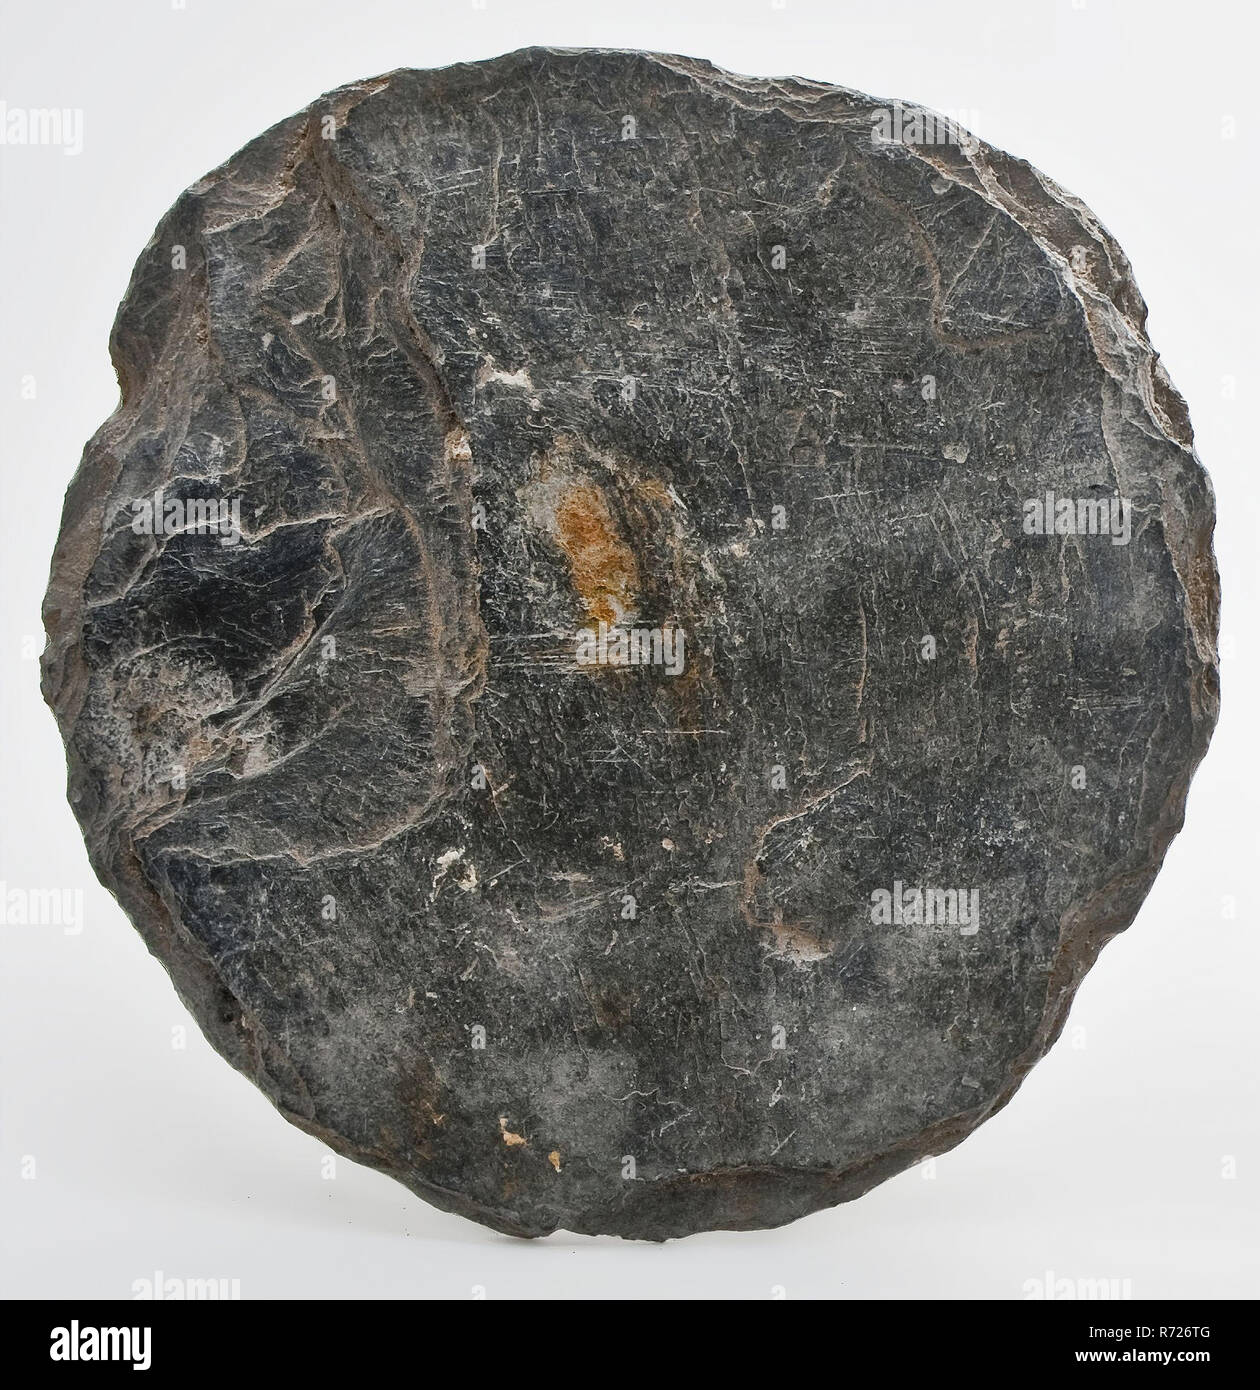 Almost circular slate, uneven surface, slate soil found slate stone, cutted Round cut disc arch archeology Valckensteyn Poortugaal Albrandswaard stone building play Soil discovery: castle Valckensteyn in Poortugaal now Albrandswaard 1961. Stock Photo